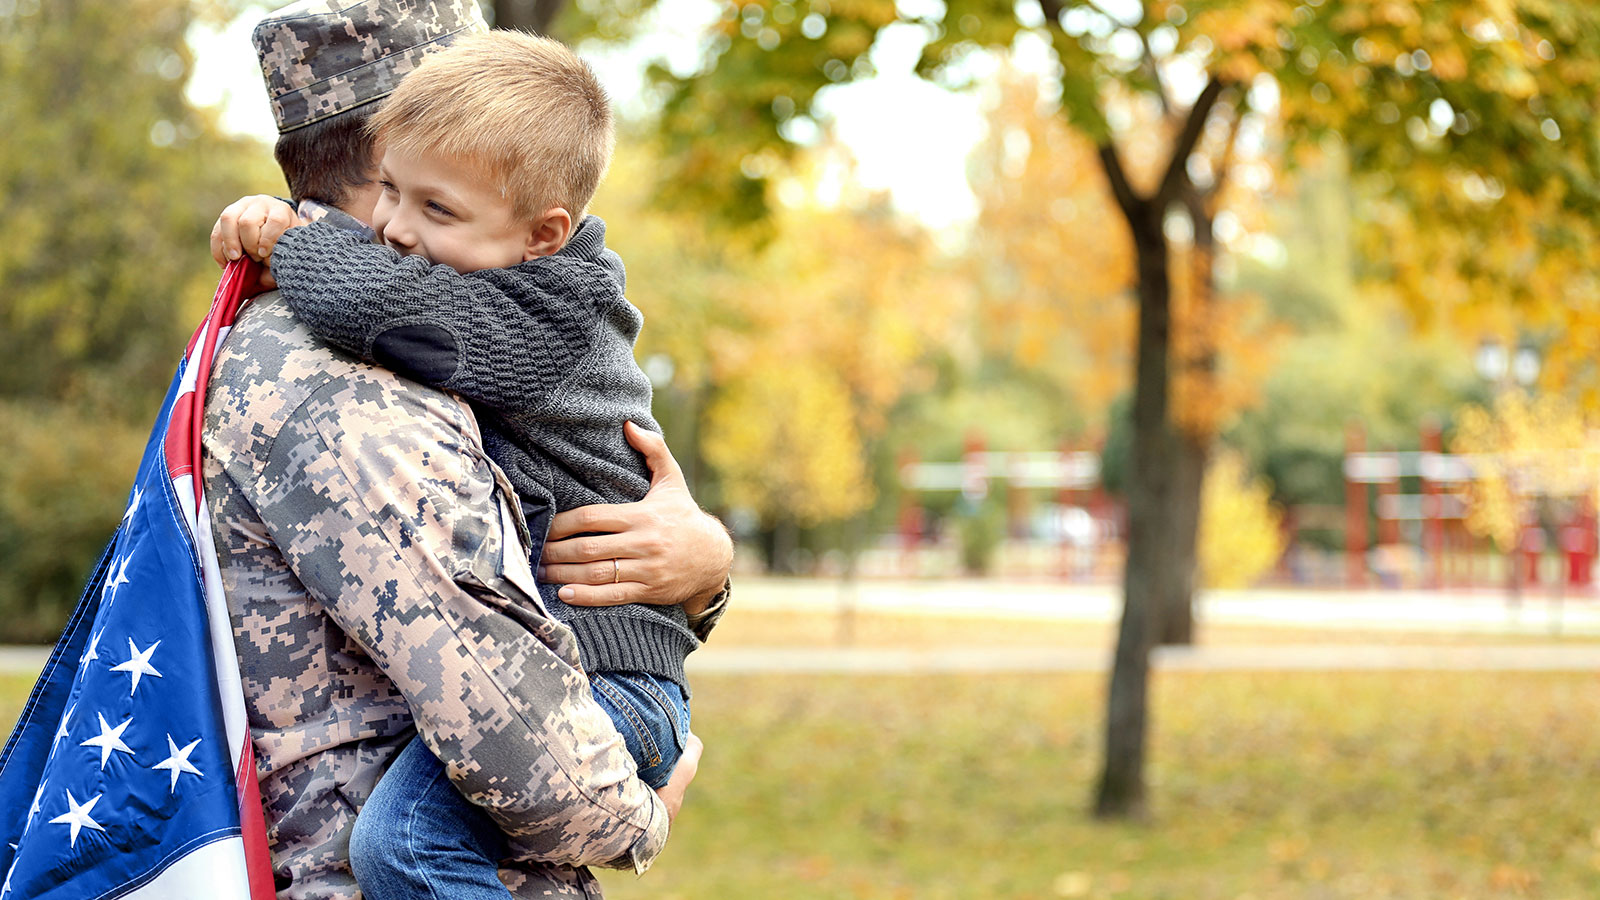 Featured image for “Are You a Veteran? Here’s How to Save on Your Home Loan & Property Taxes”